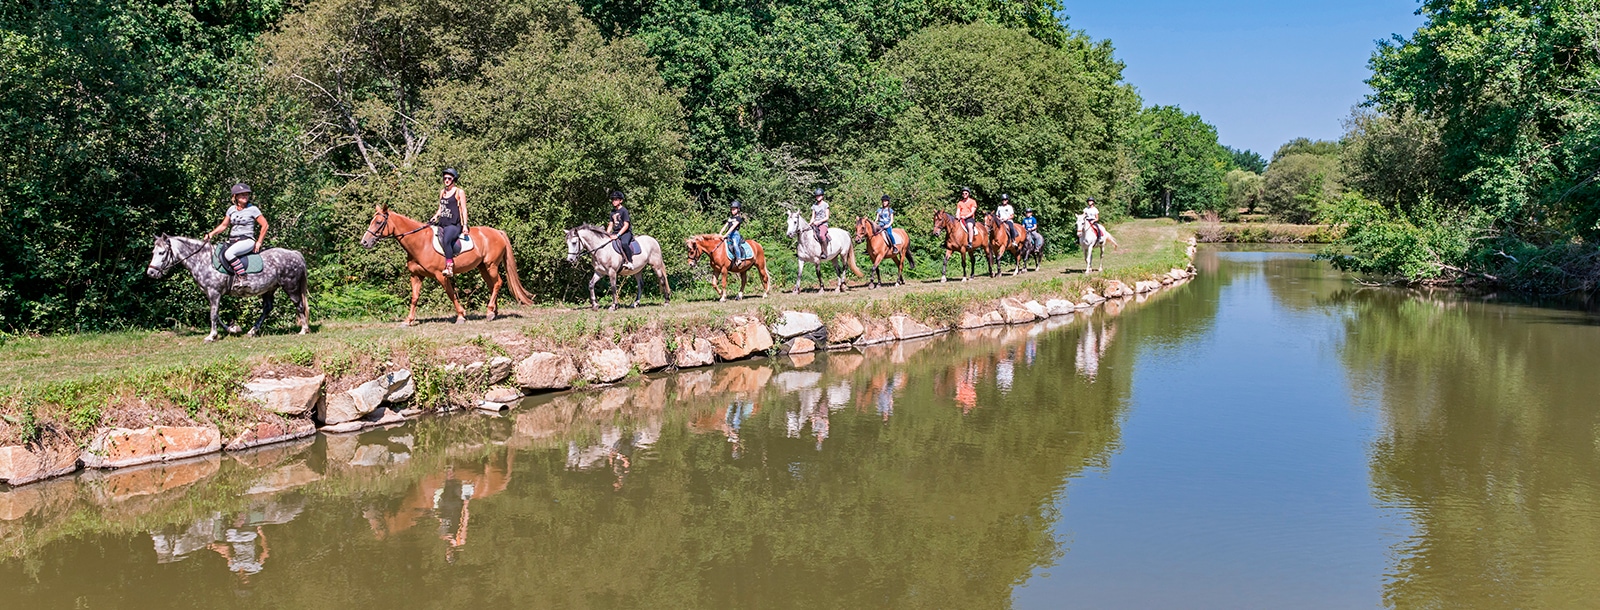 Come and live your passion for horses in Mané Guernehué riding school